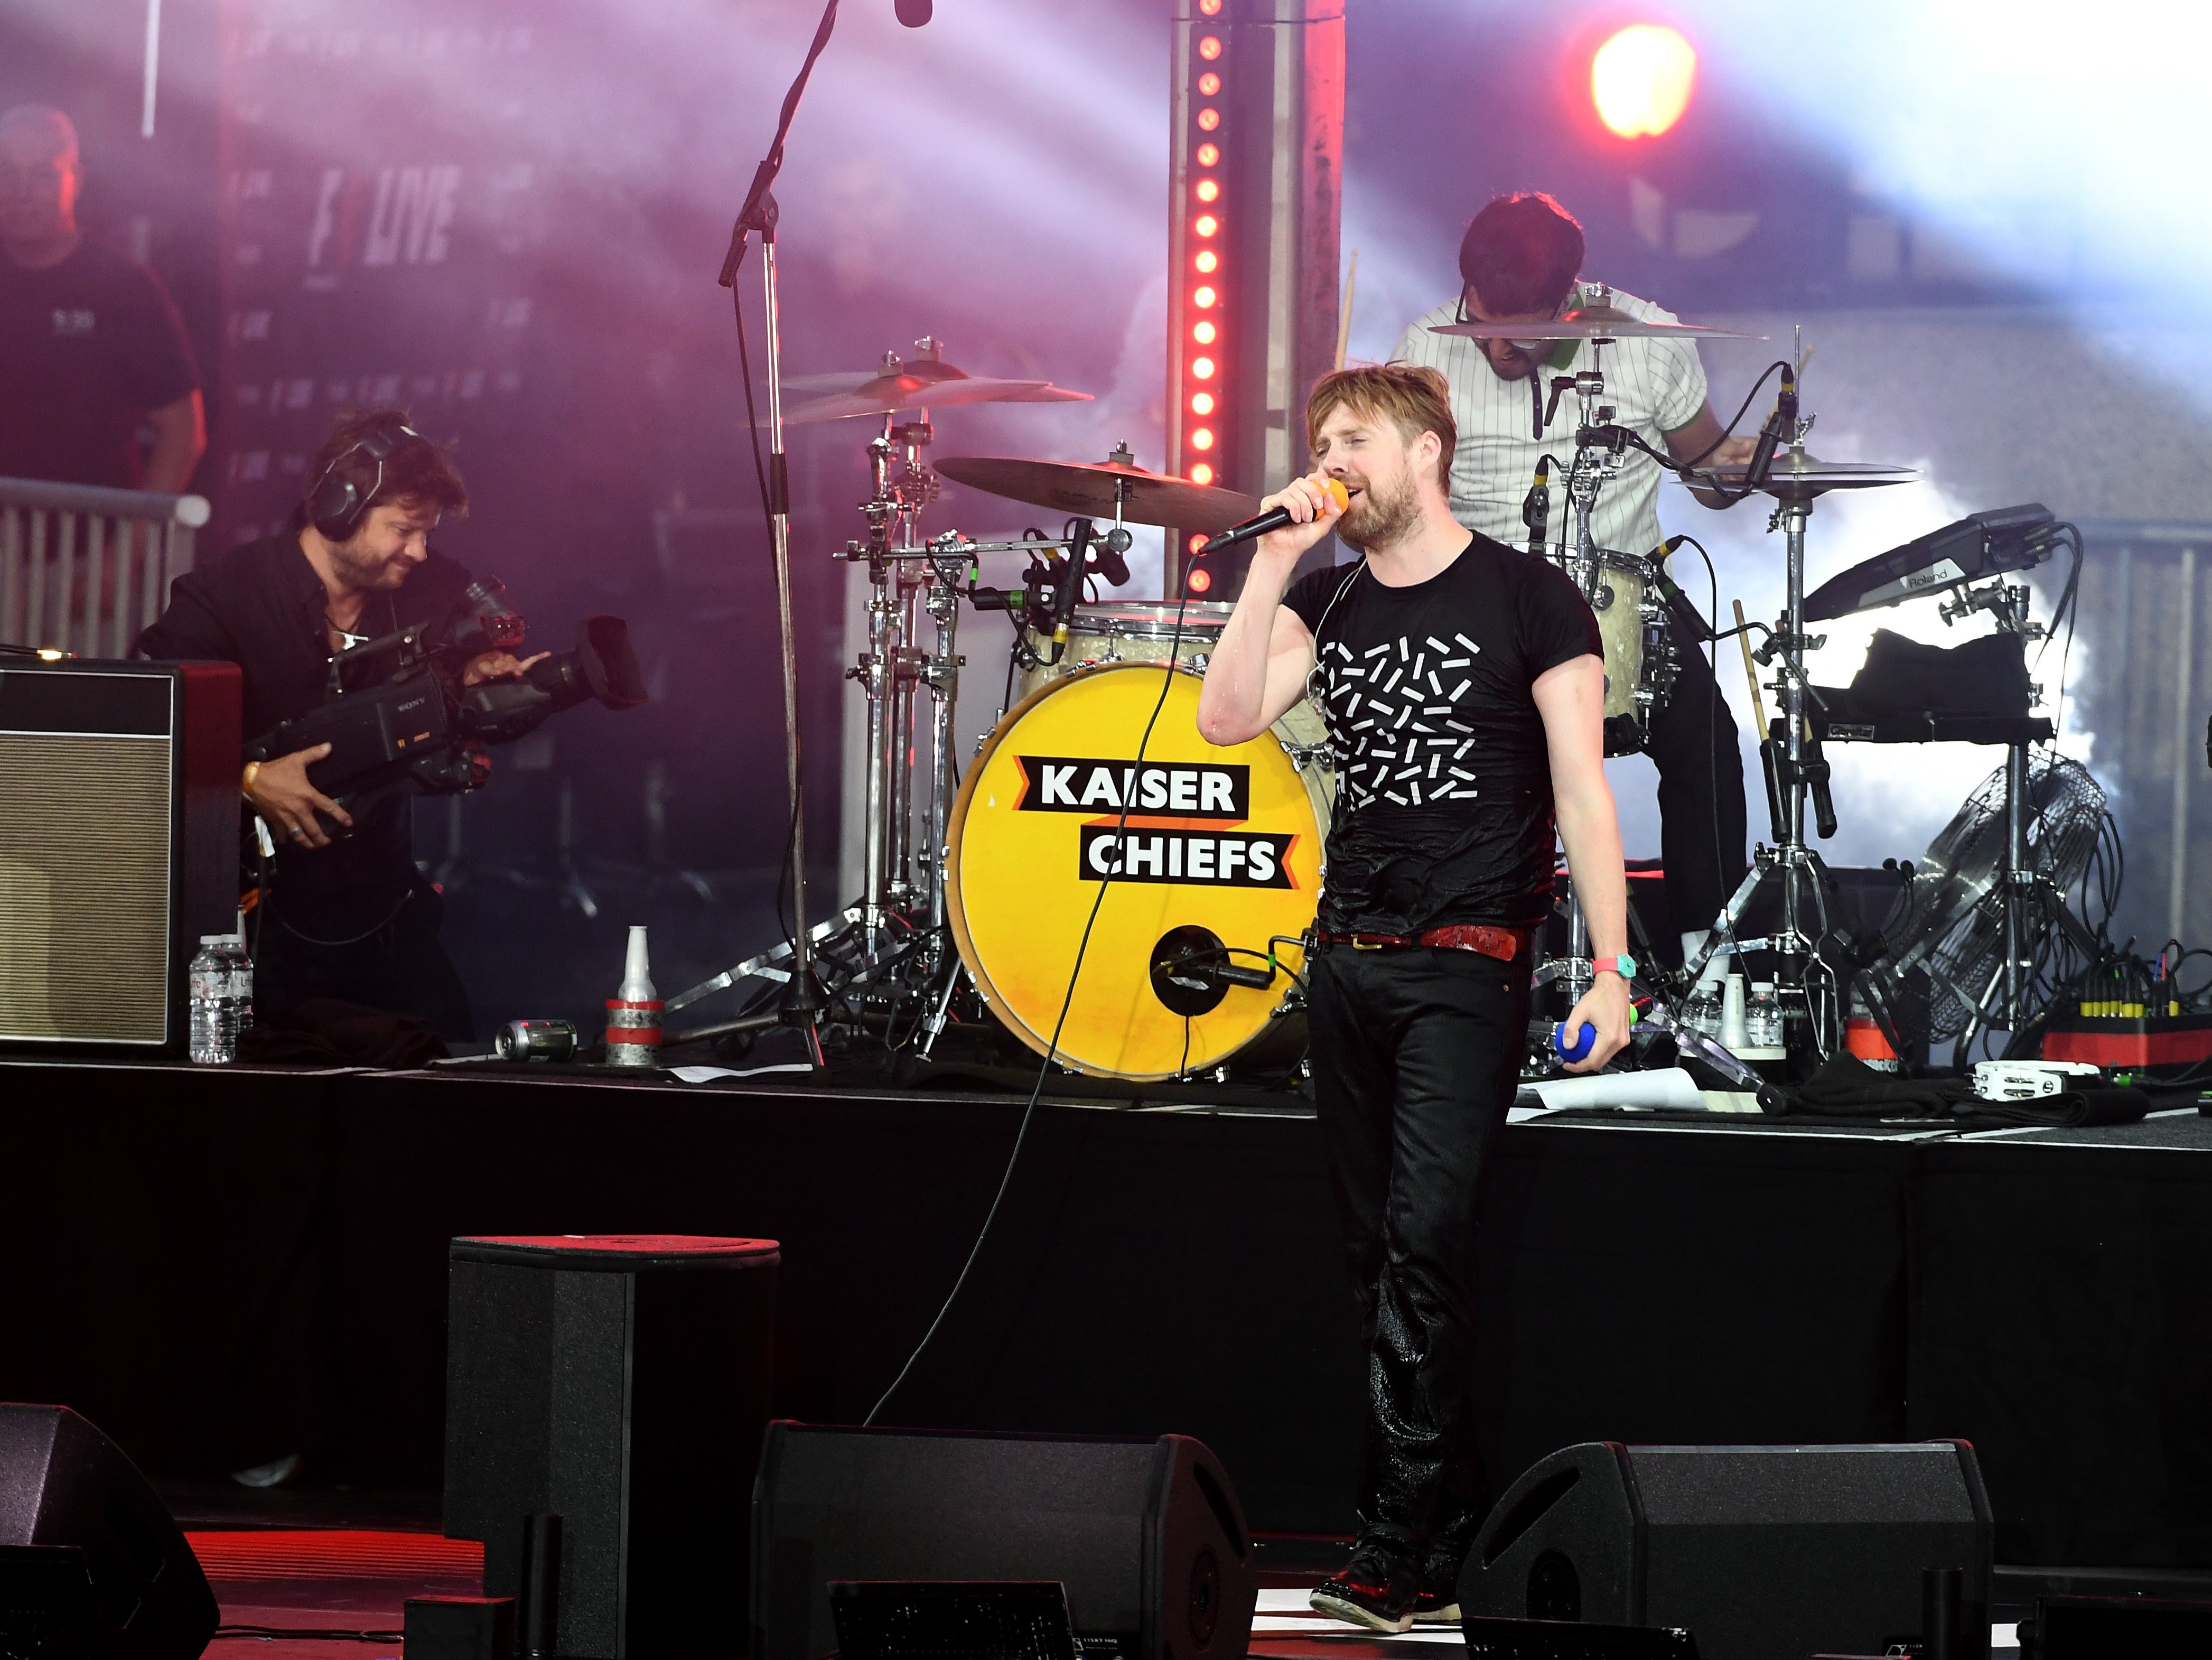 The Kaiser Chiefs, who formed in Leeds, will play the Saturday